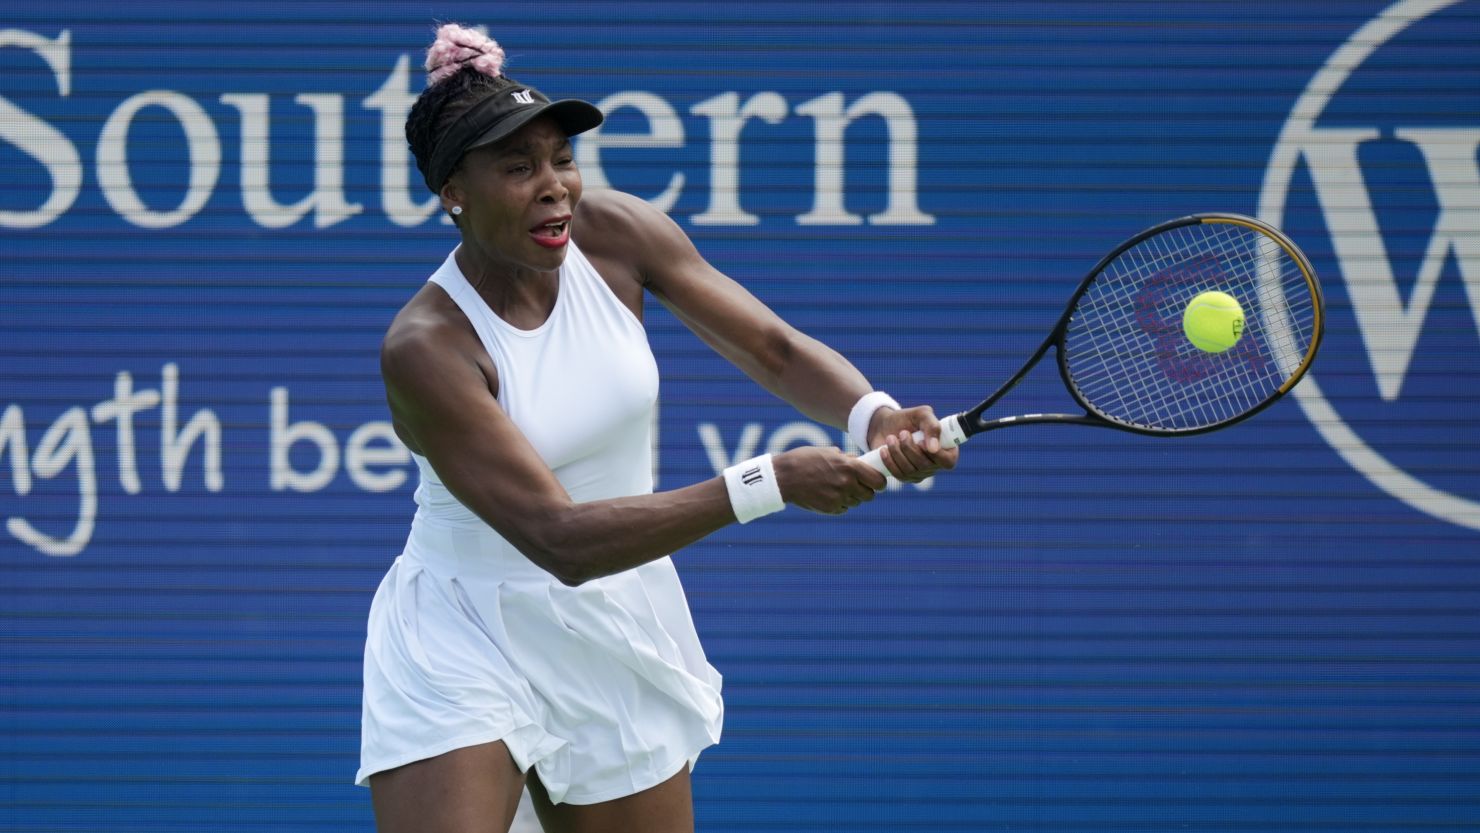 MASON, OHIO - AUGUST 16: Venus Williams of the United States returns a shot to Qinwen Zheng of China during their match at the Western & Southern Open at Lindner Family Tennis Center on August 16, 2023 in Mason, Ohio. (Photo by Aaron Doster/Getty Images)